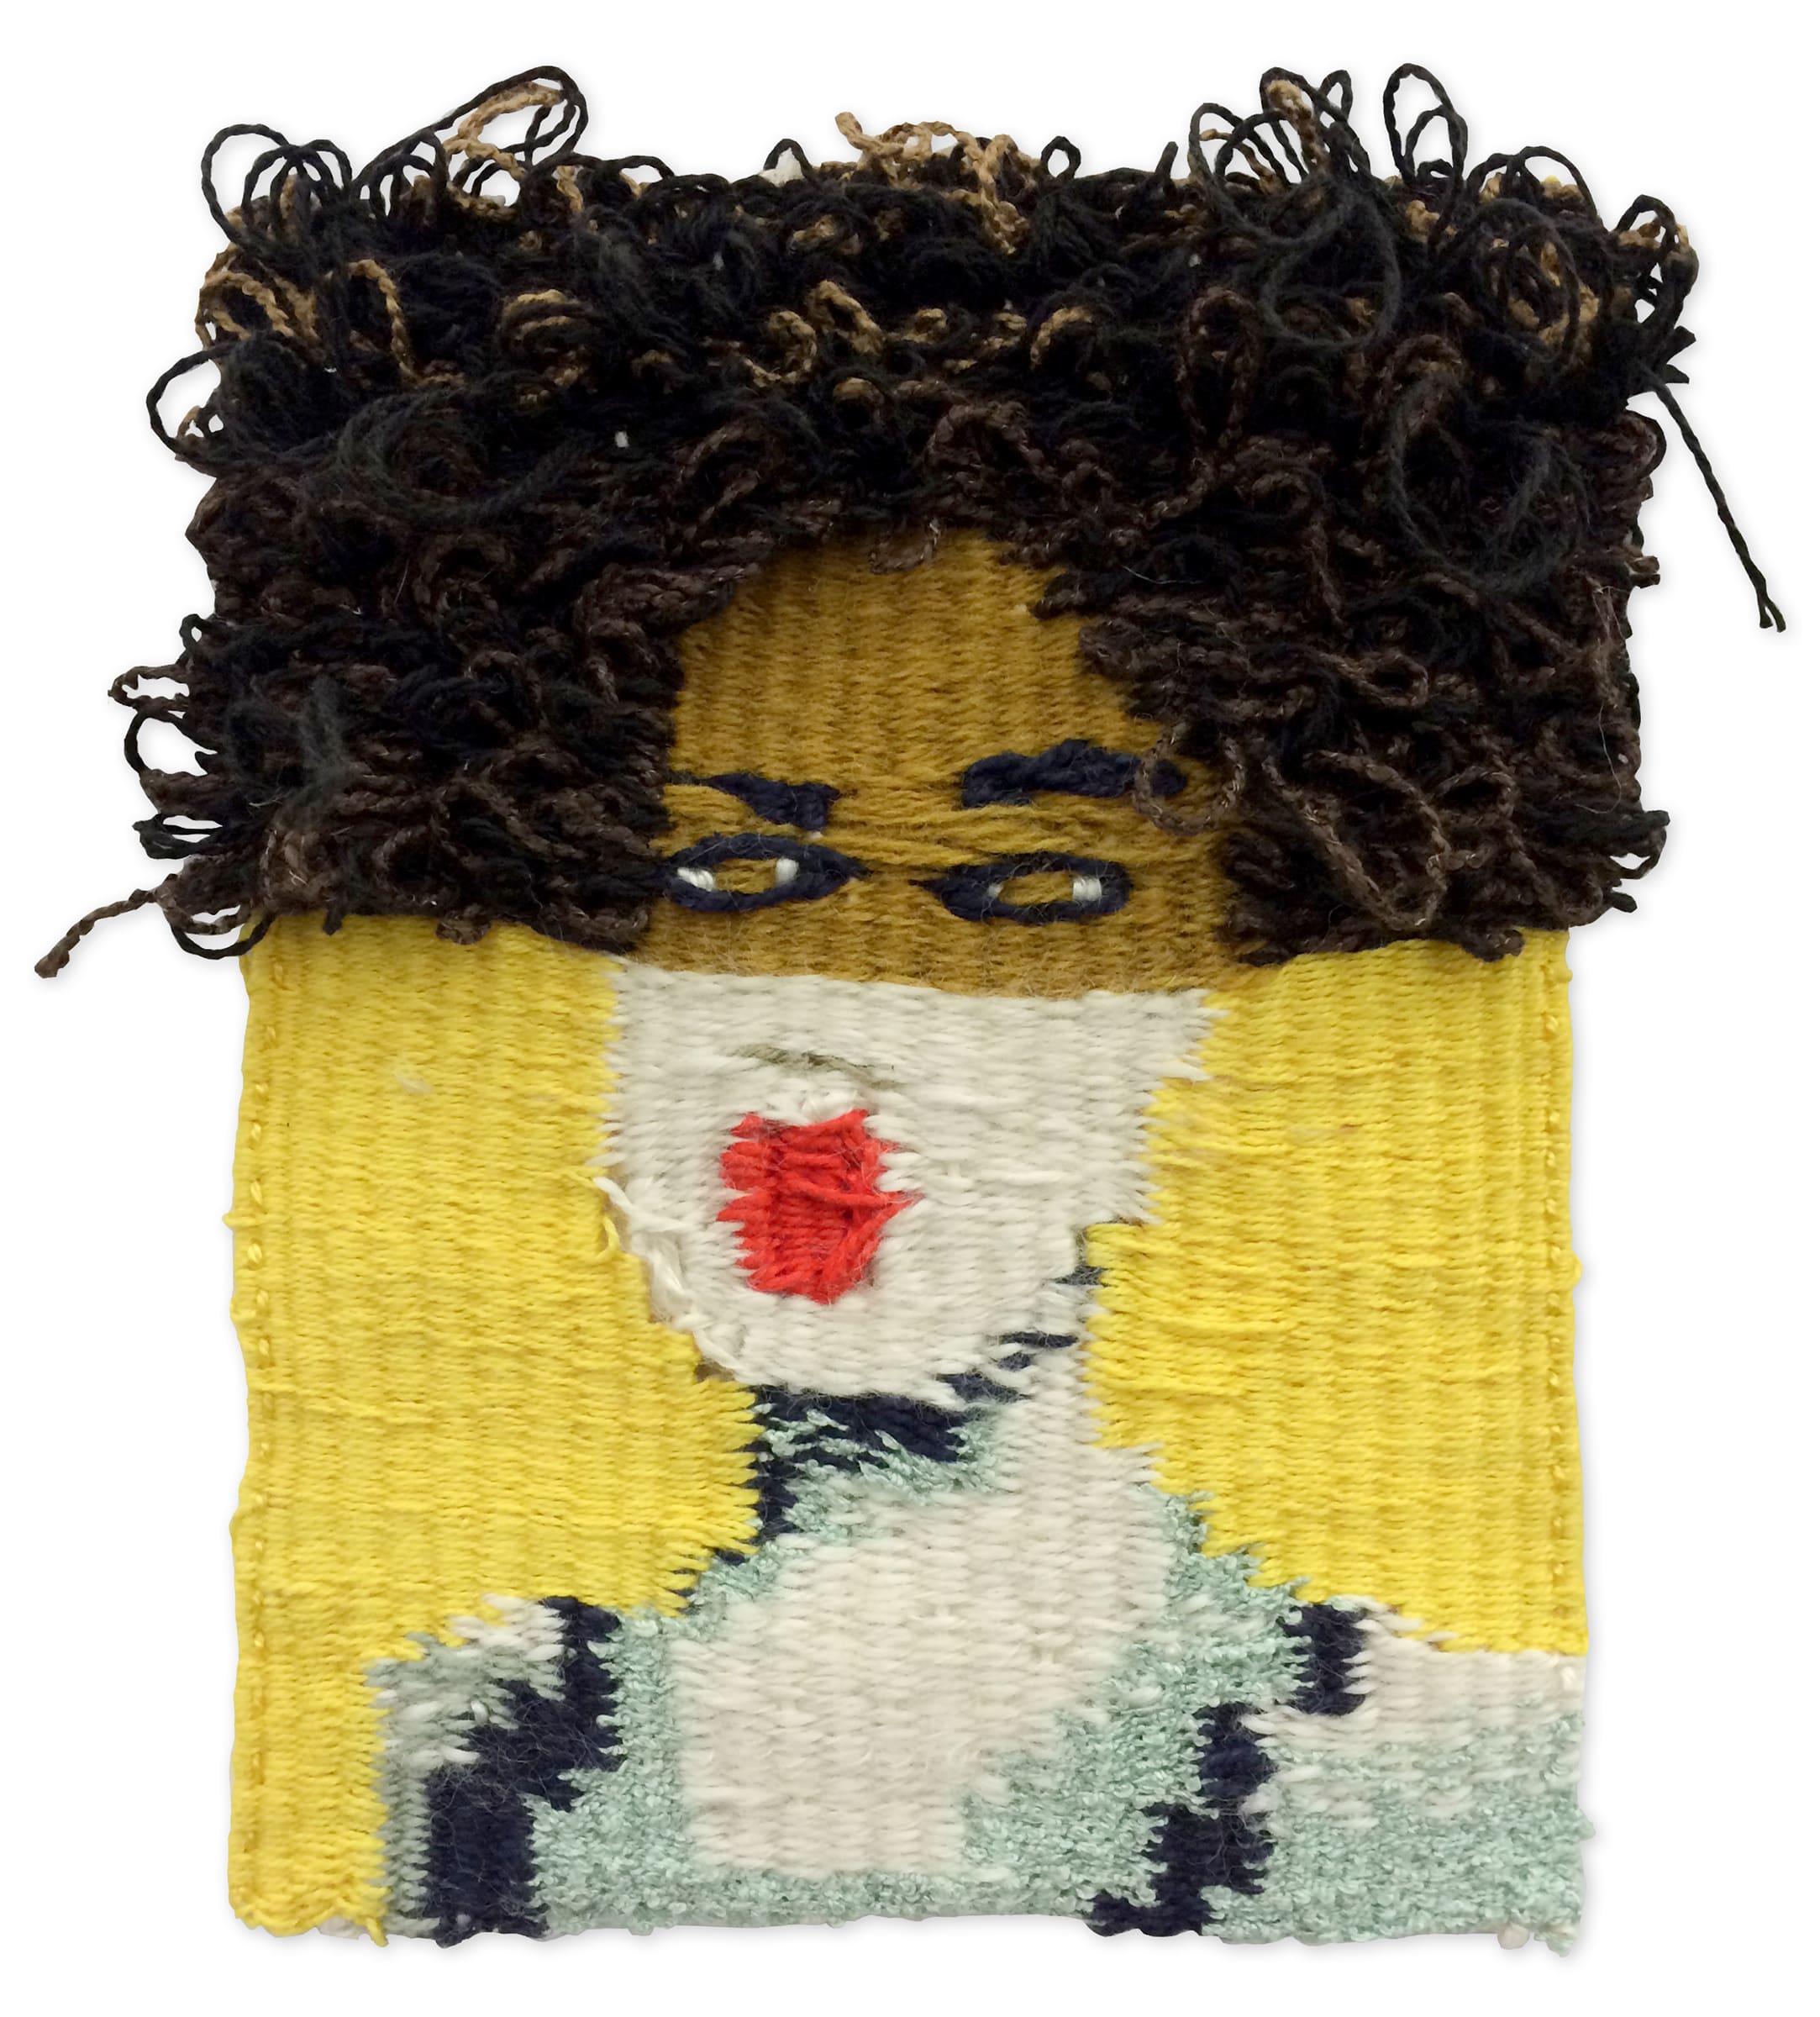 woven face with loops for hair